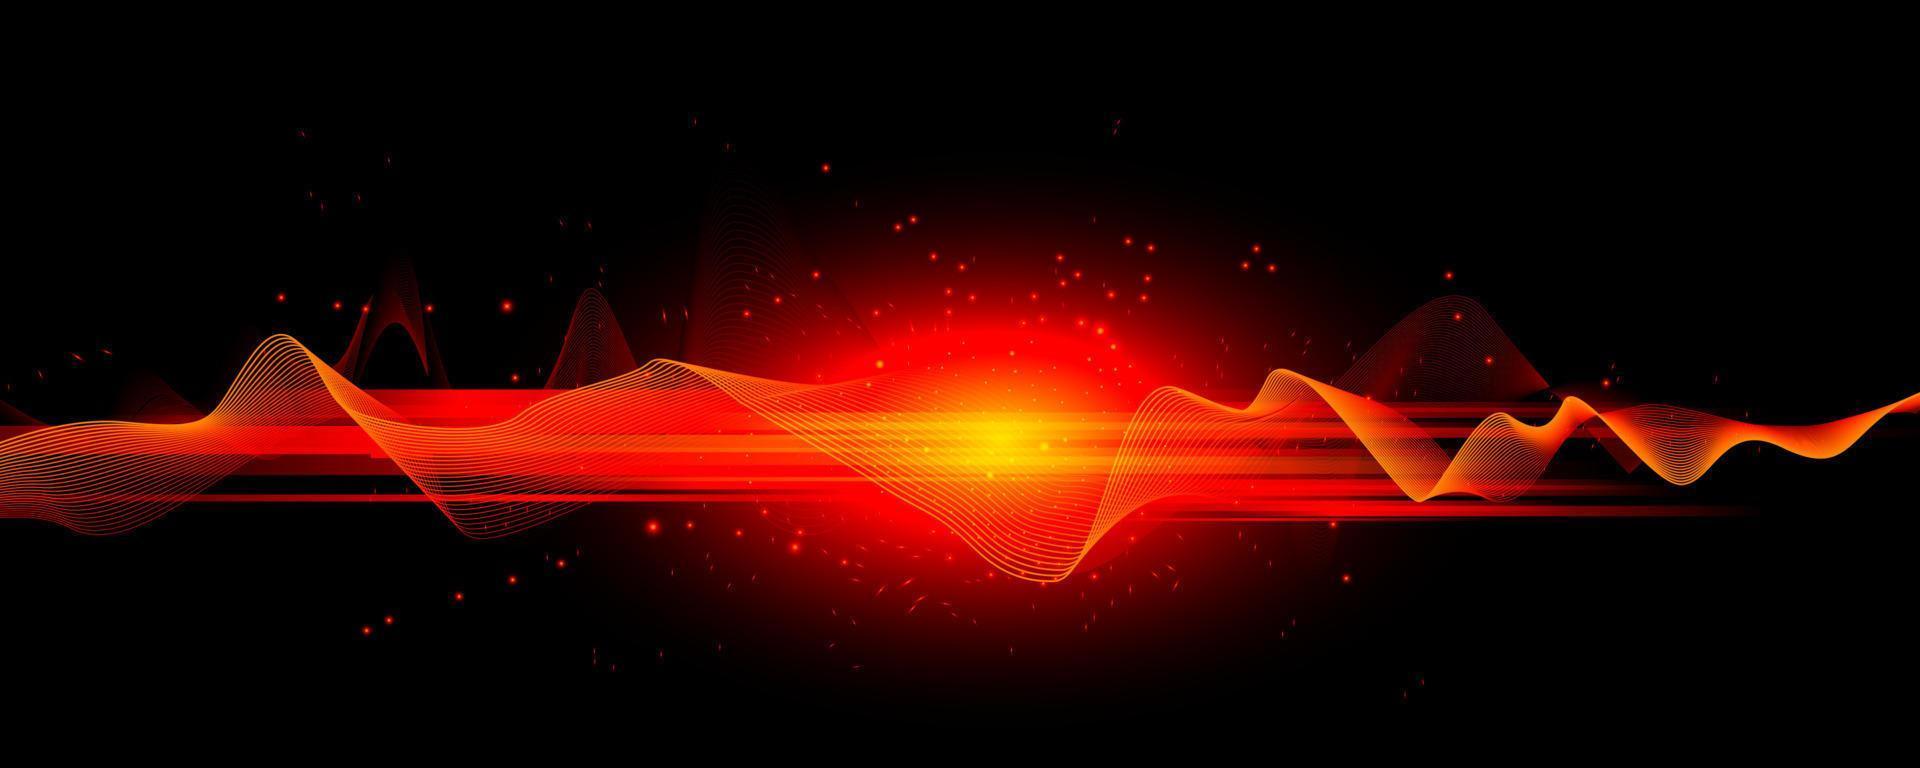 abstrac flowing motion waves with red spark light effects. Vector illustration